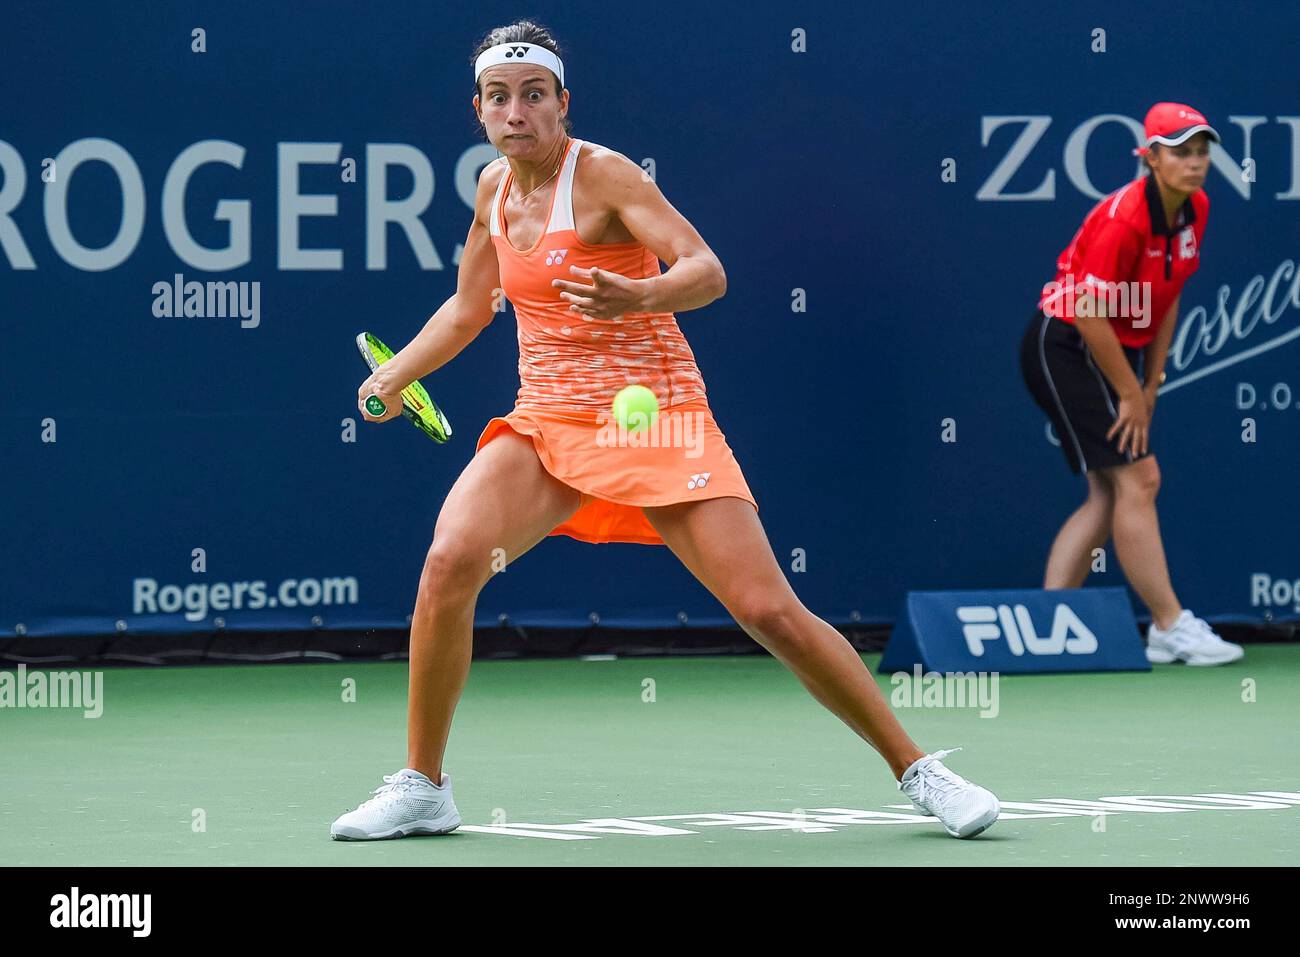 MONTREAL, QC - AUGUST 08: Anastasija Sevastova (LAT) returns the ball  during her second round match at WTA Coupe Rogers on August 8, 2018 at IGA  Stadium in Montréal, QC (Photo by